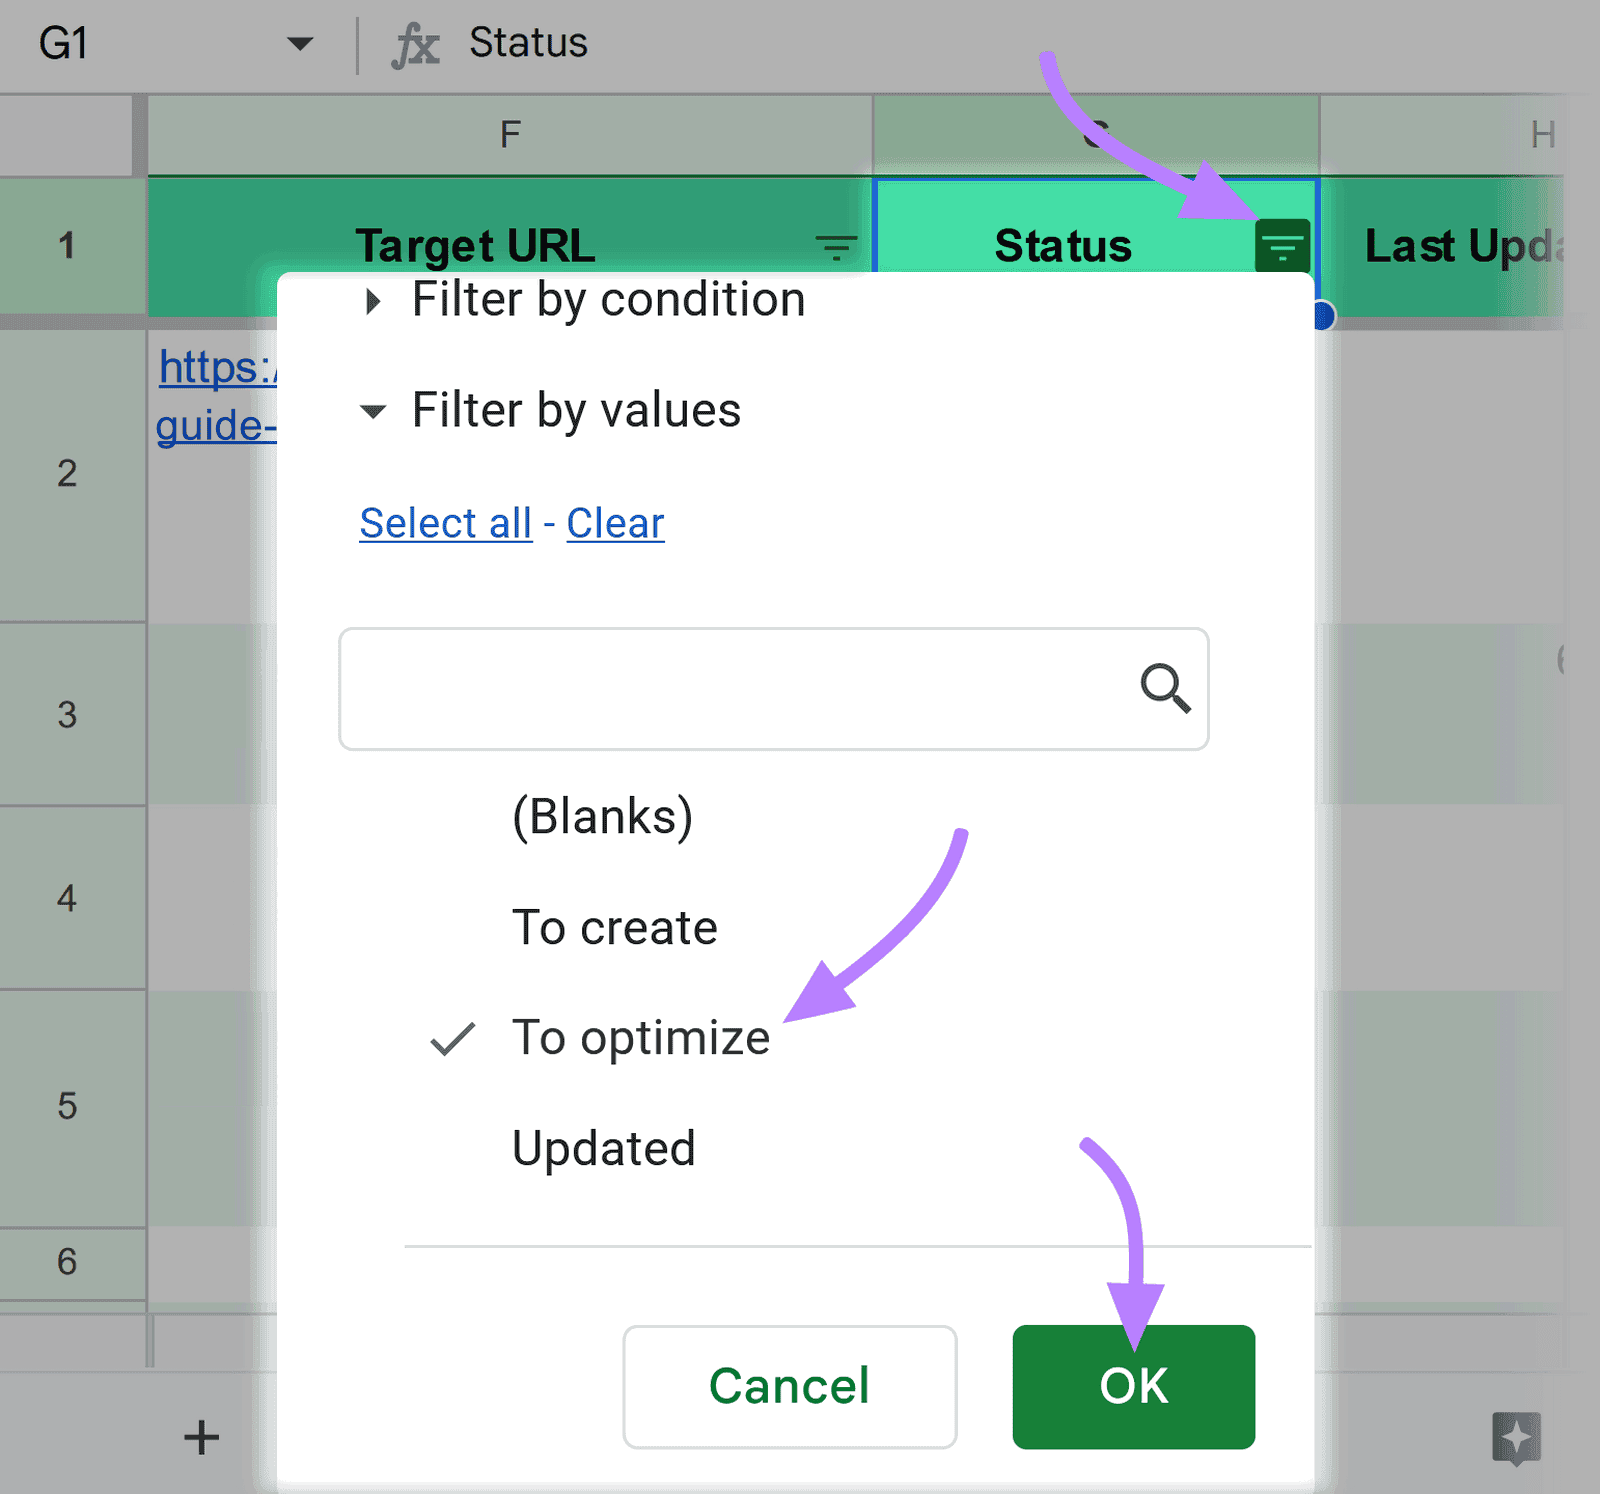 Spreadsheet filter dropdown menu in the "Status" column, with "To optimize" selected and an "OK" button at the bottom.